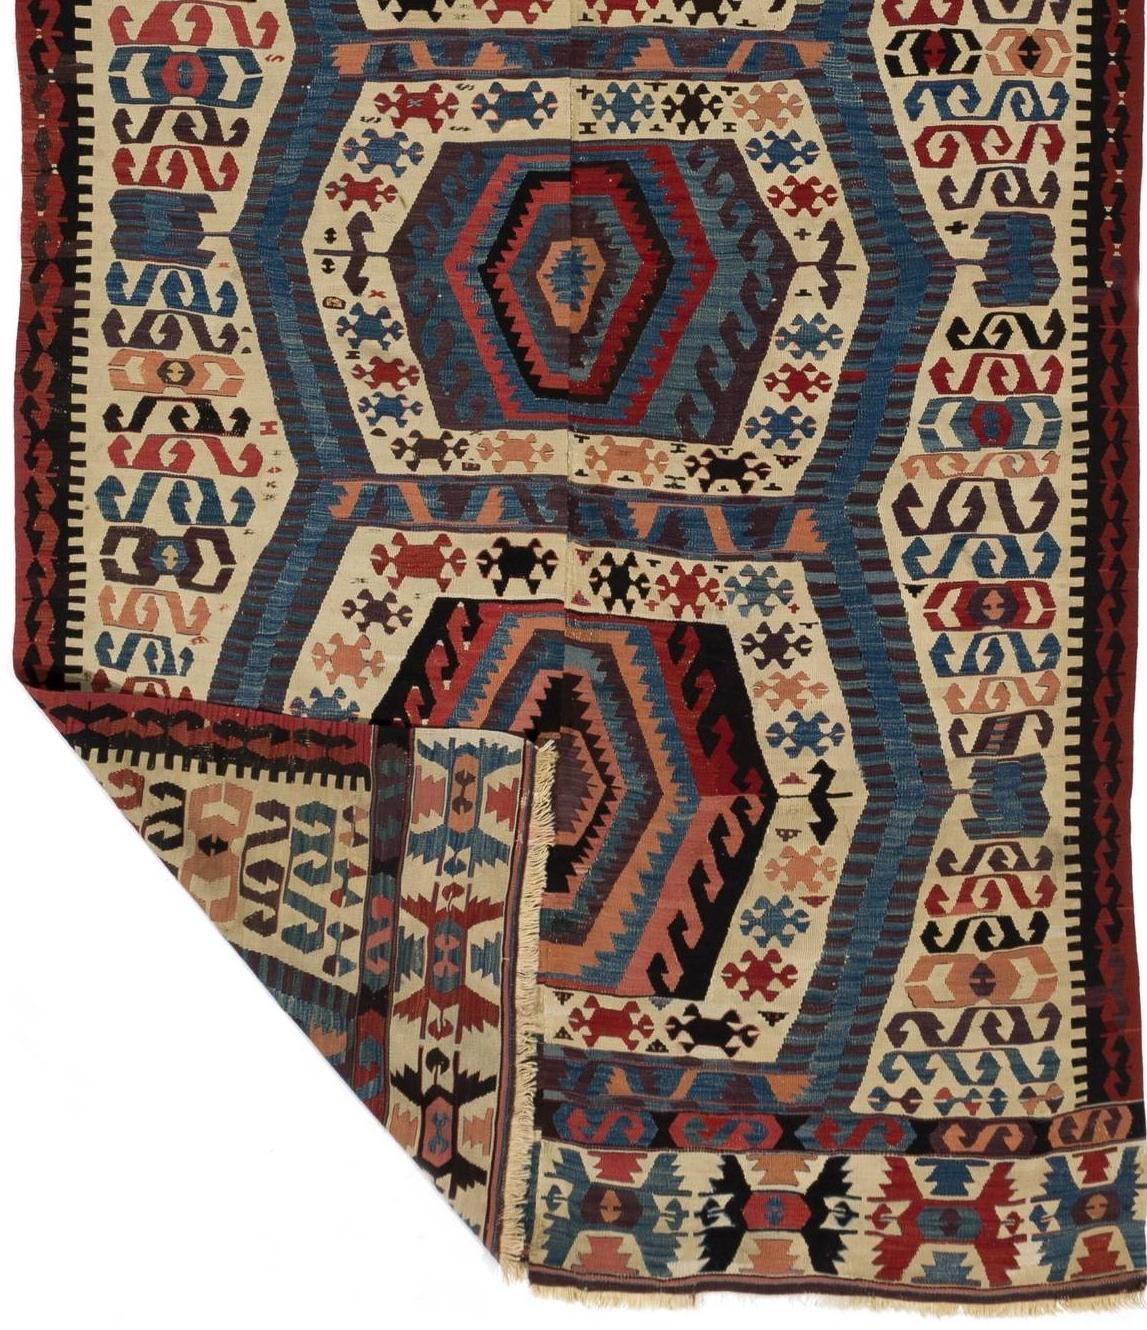 A striking work of antique textile art from west Anatolia. This finely hand-woven wool kilim with beautifully saturated natural dyes is from a private collection of early Turkish flat-weaves we have recently acquired. 
Size: 5' x 12'3''